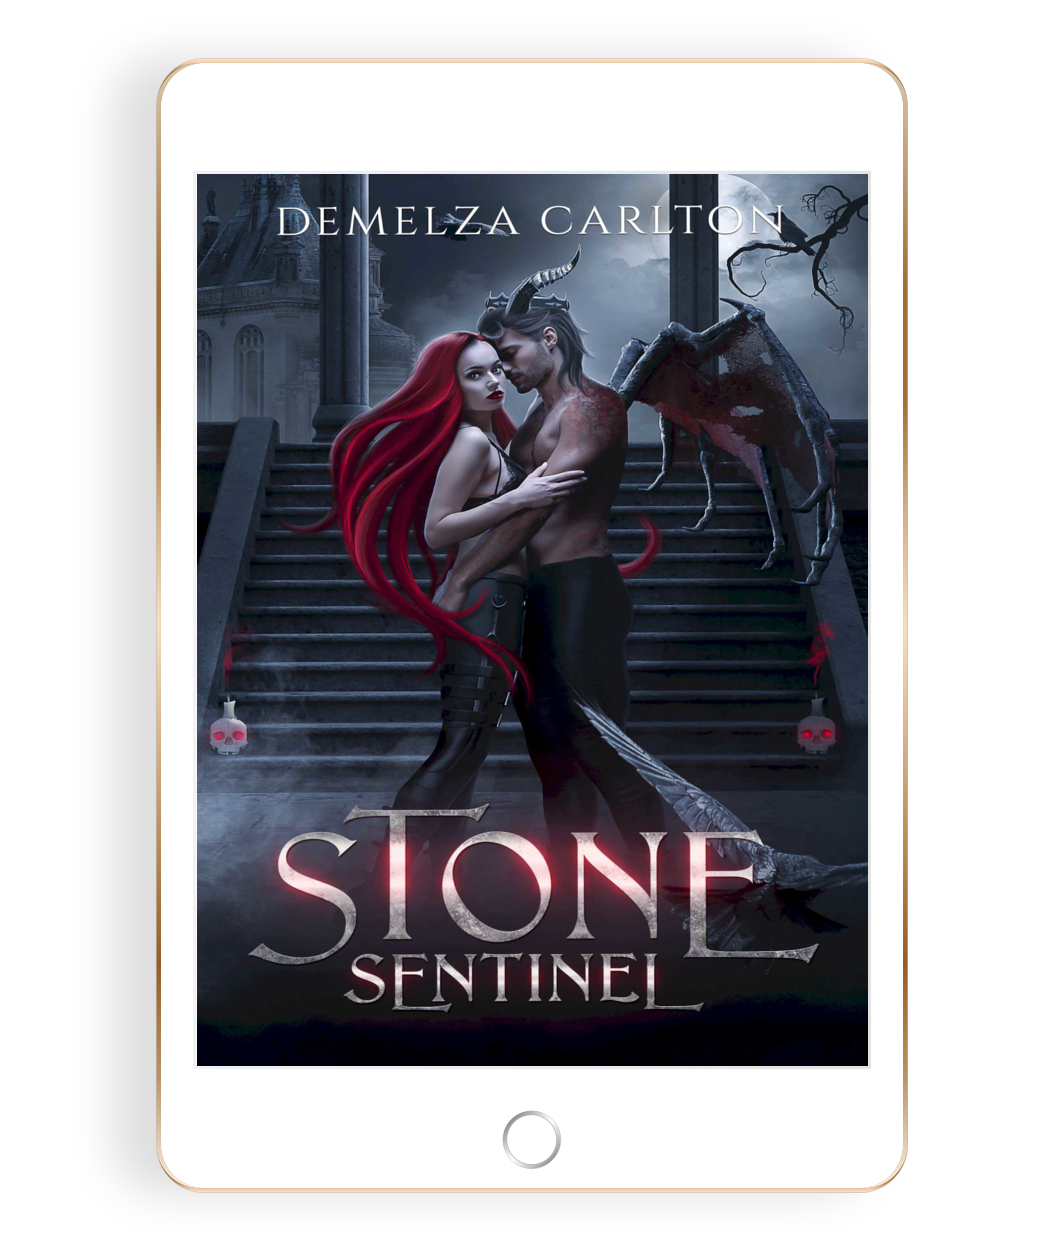  A steamy paranormal protector gargoyle monster romance tale for fans of Sarah J Maas, ACOTAR, Rebecca Yarros and Charlaine Harris